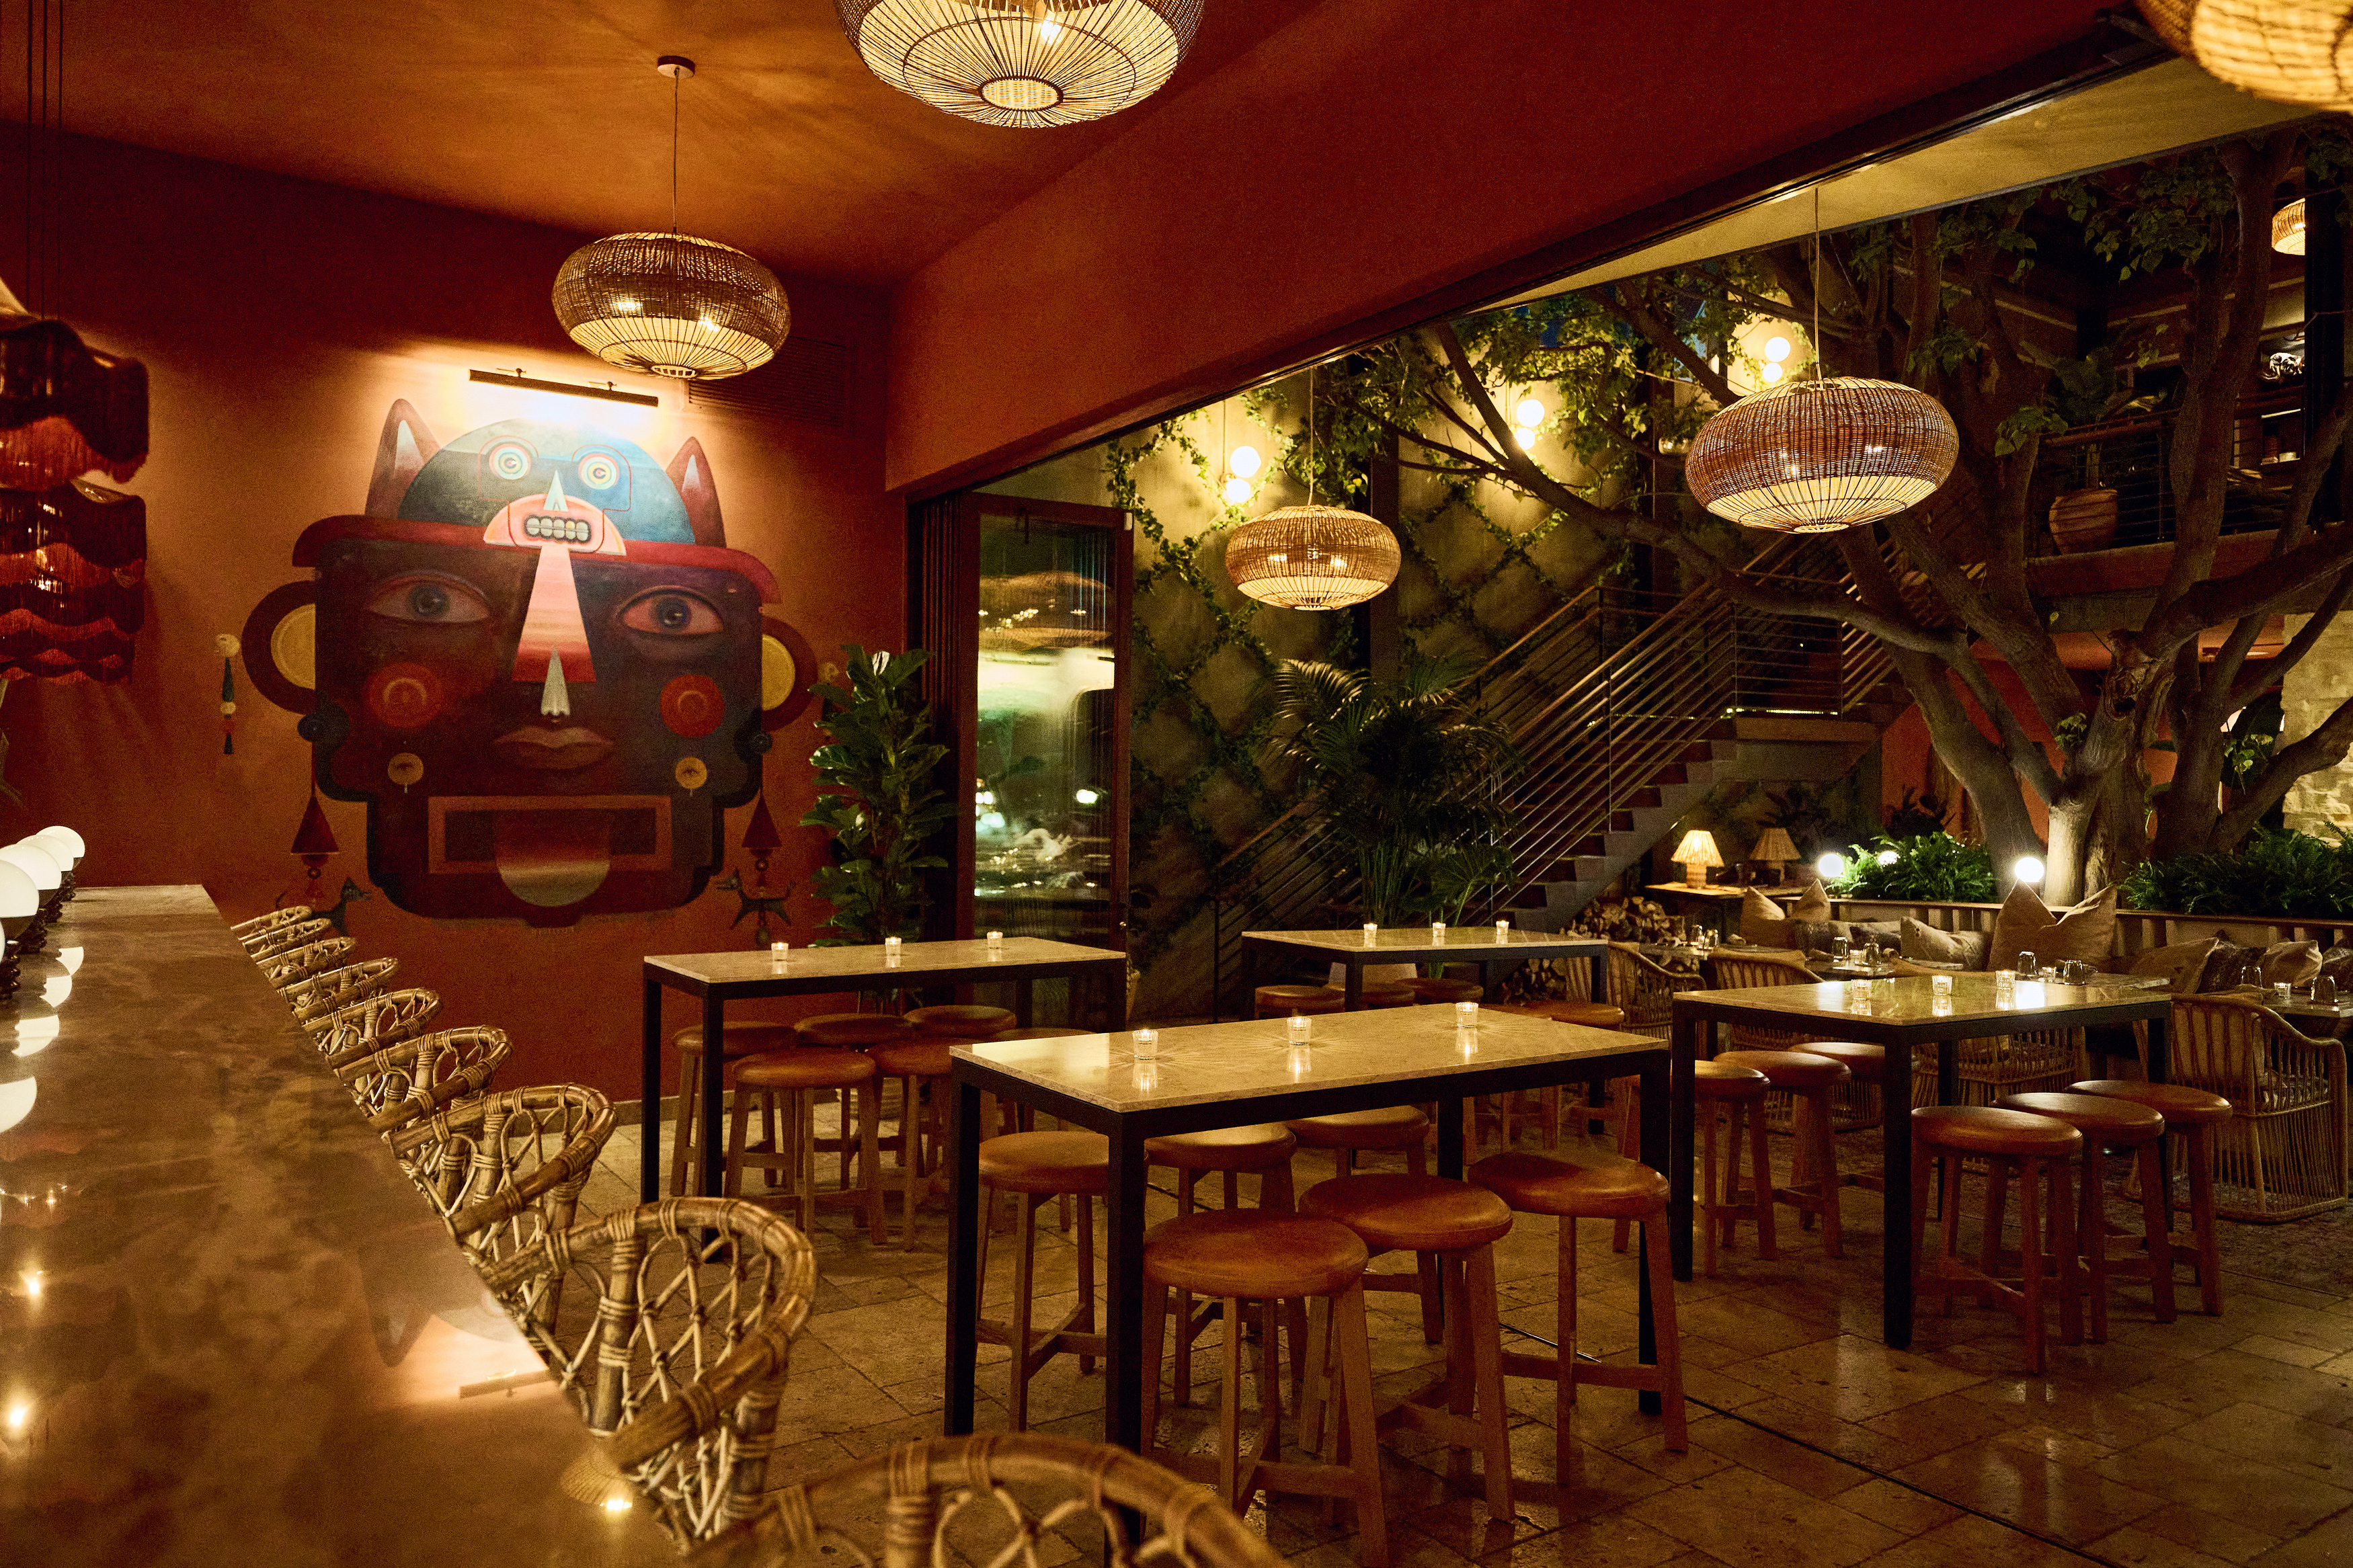 A dining area and bar at Mírate restaurant in Los Angeles, California.